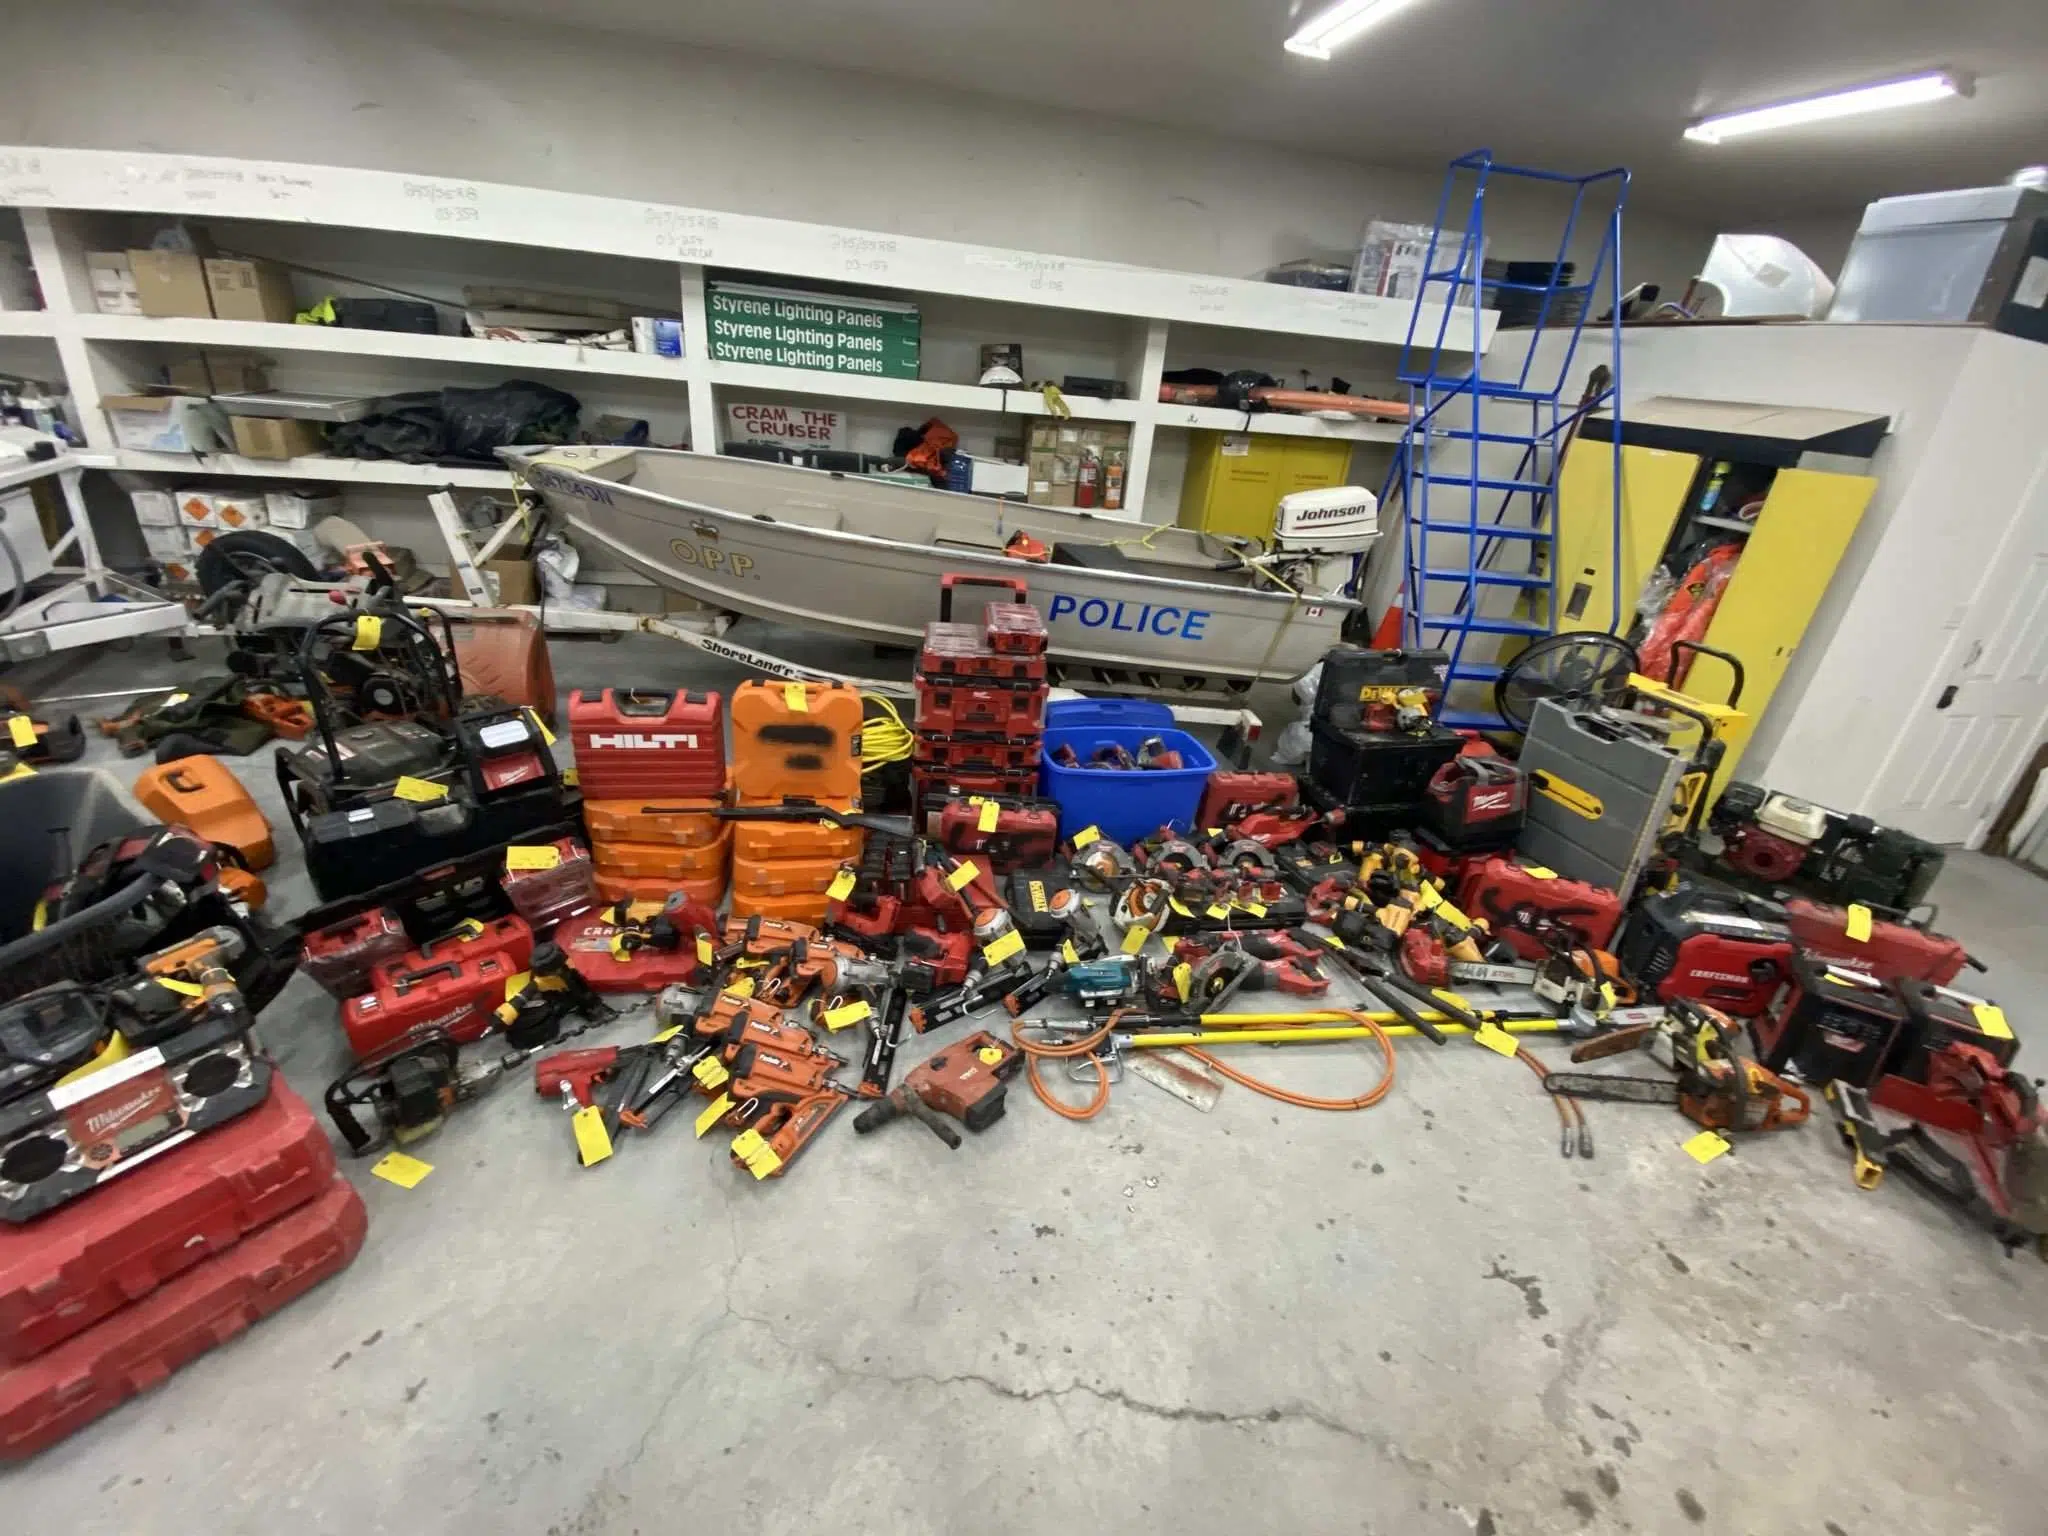 Three arrested; $70,000 in stolen items seized in Stirling-Rawdon